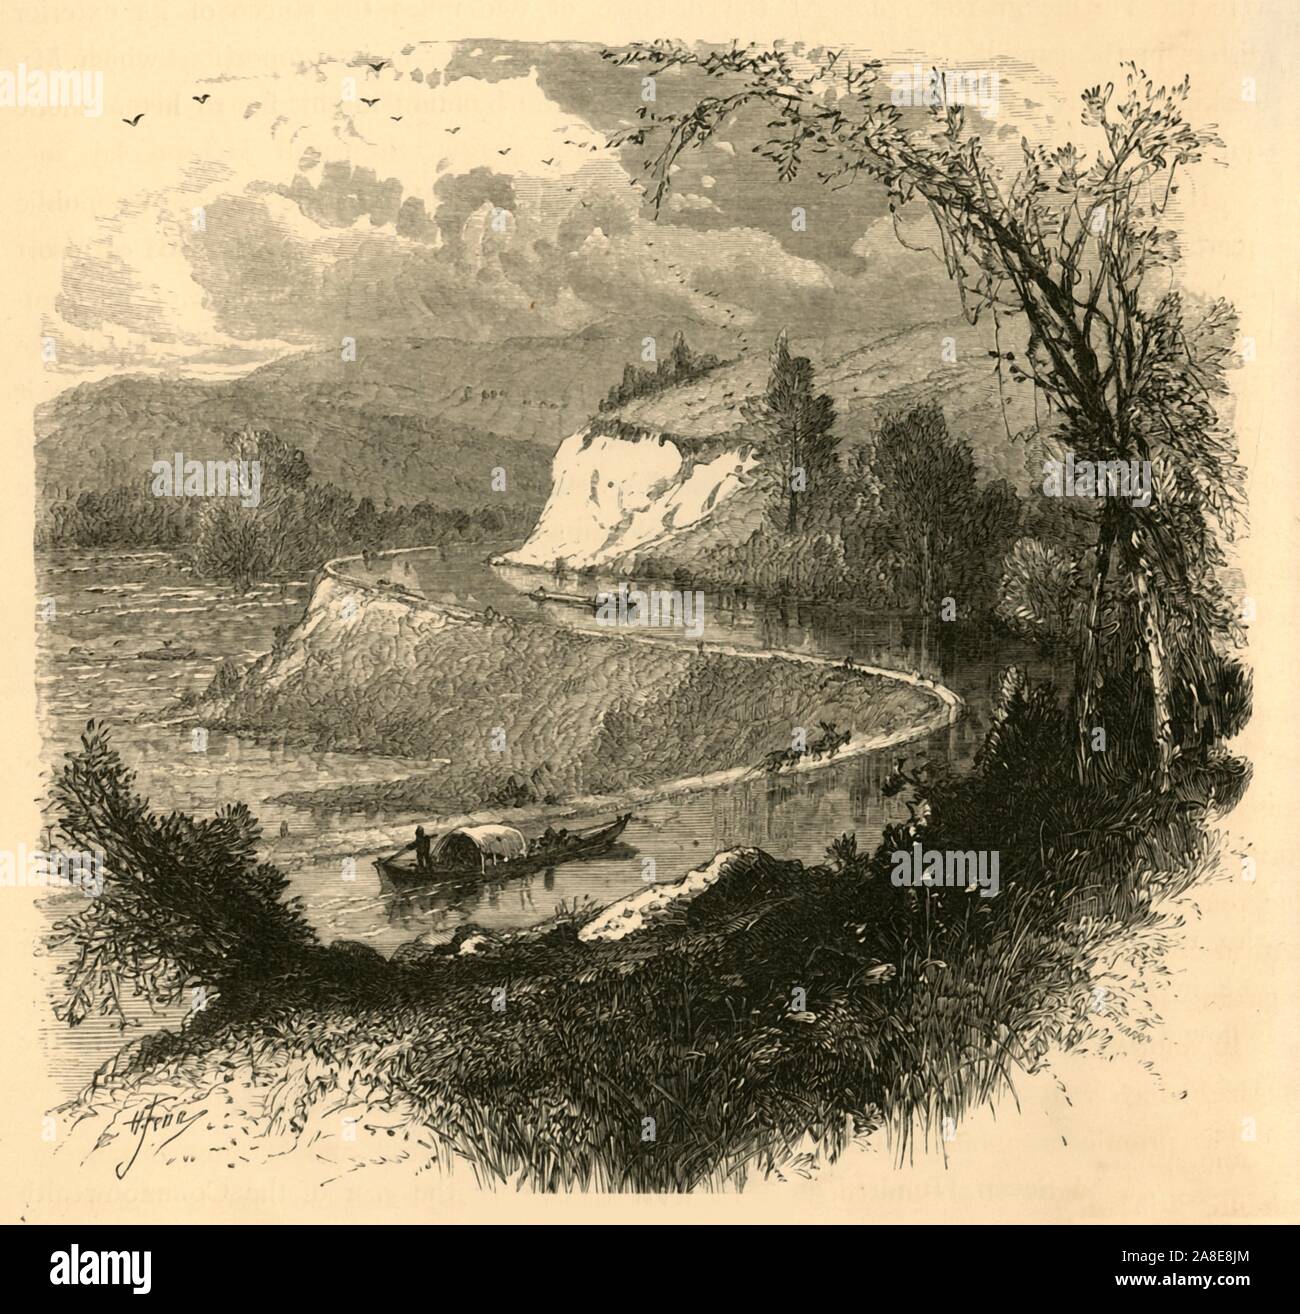 'The James, above Richmond', 1872. The Kanawha Canal and the James River, Virginia, USA. From &quot;Picturesque America; or, The Land We Live In, A Delineation by Pen and Pencil of the Mountains, Rivers, Lakes...with Illustrations on Steel and Wood by Eminent American Artists&quot; Vol. I, edited by William Cullen Bryant. [D. Appleton and Company, New York, 1872] Stock Photo